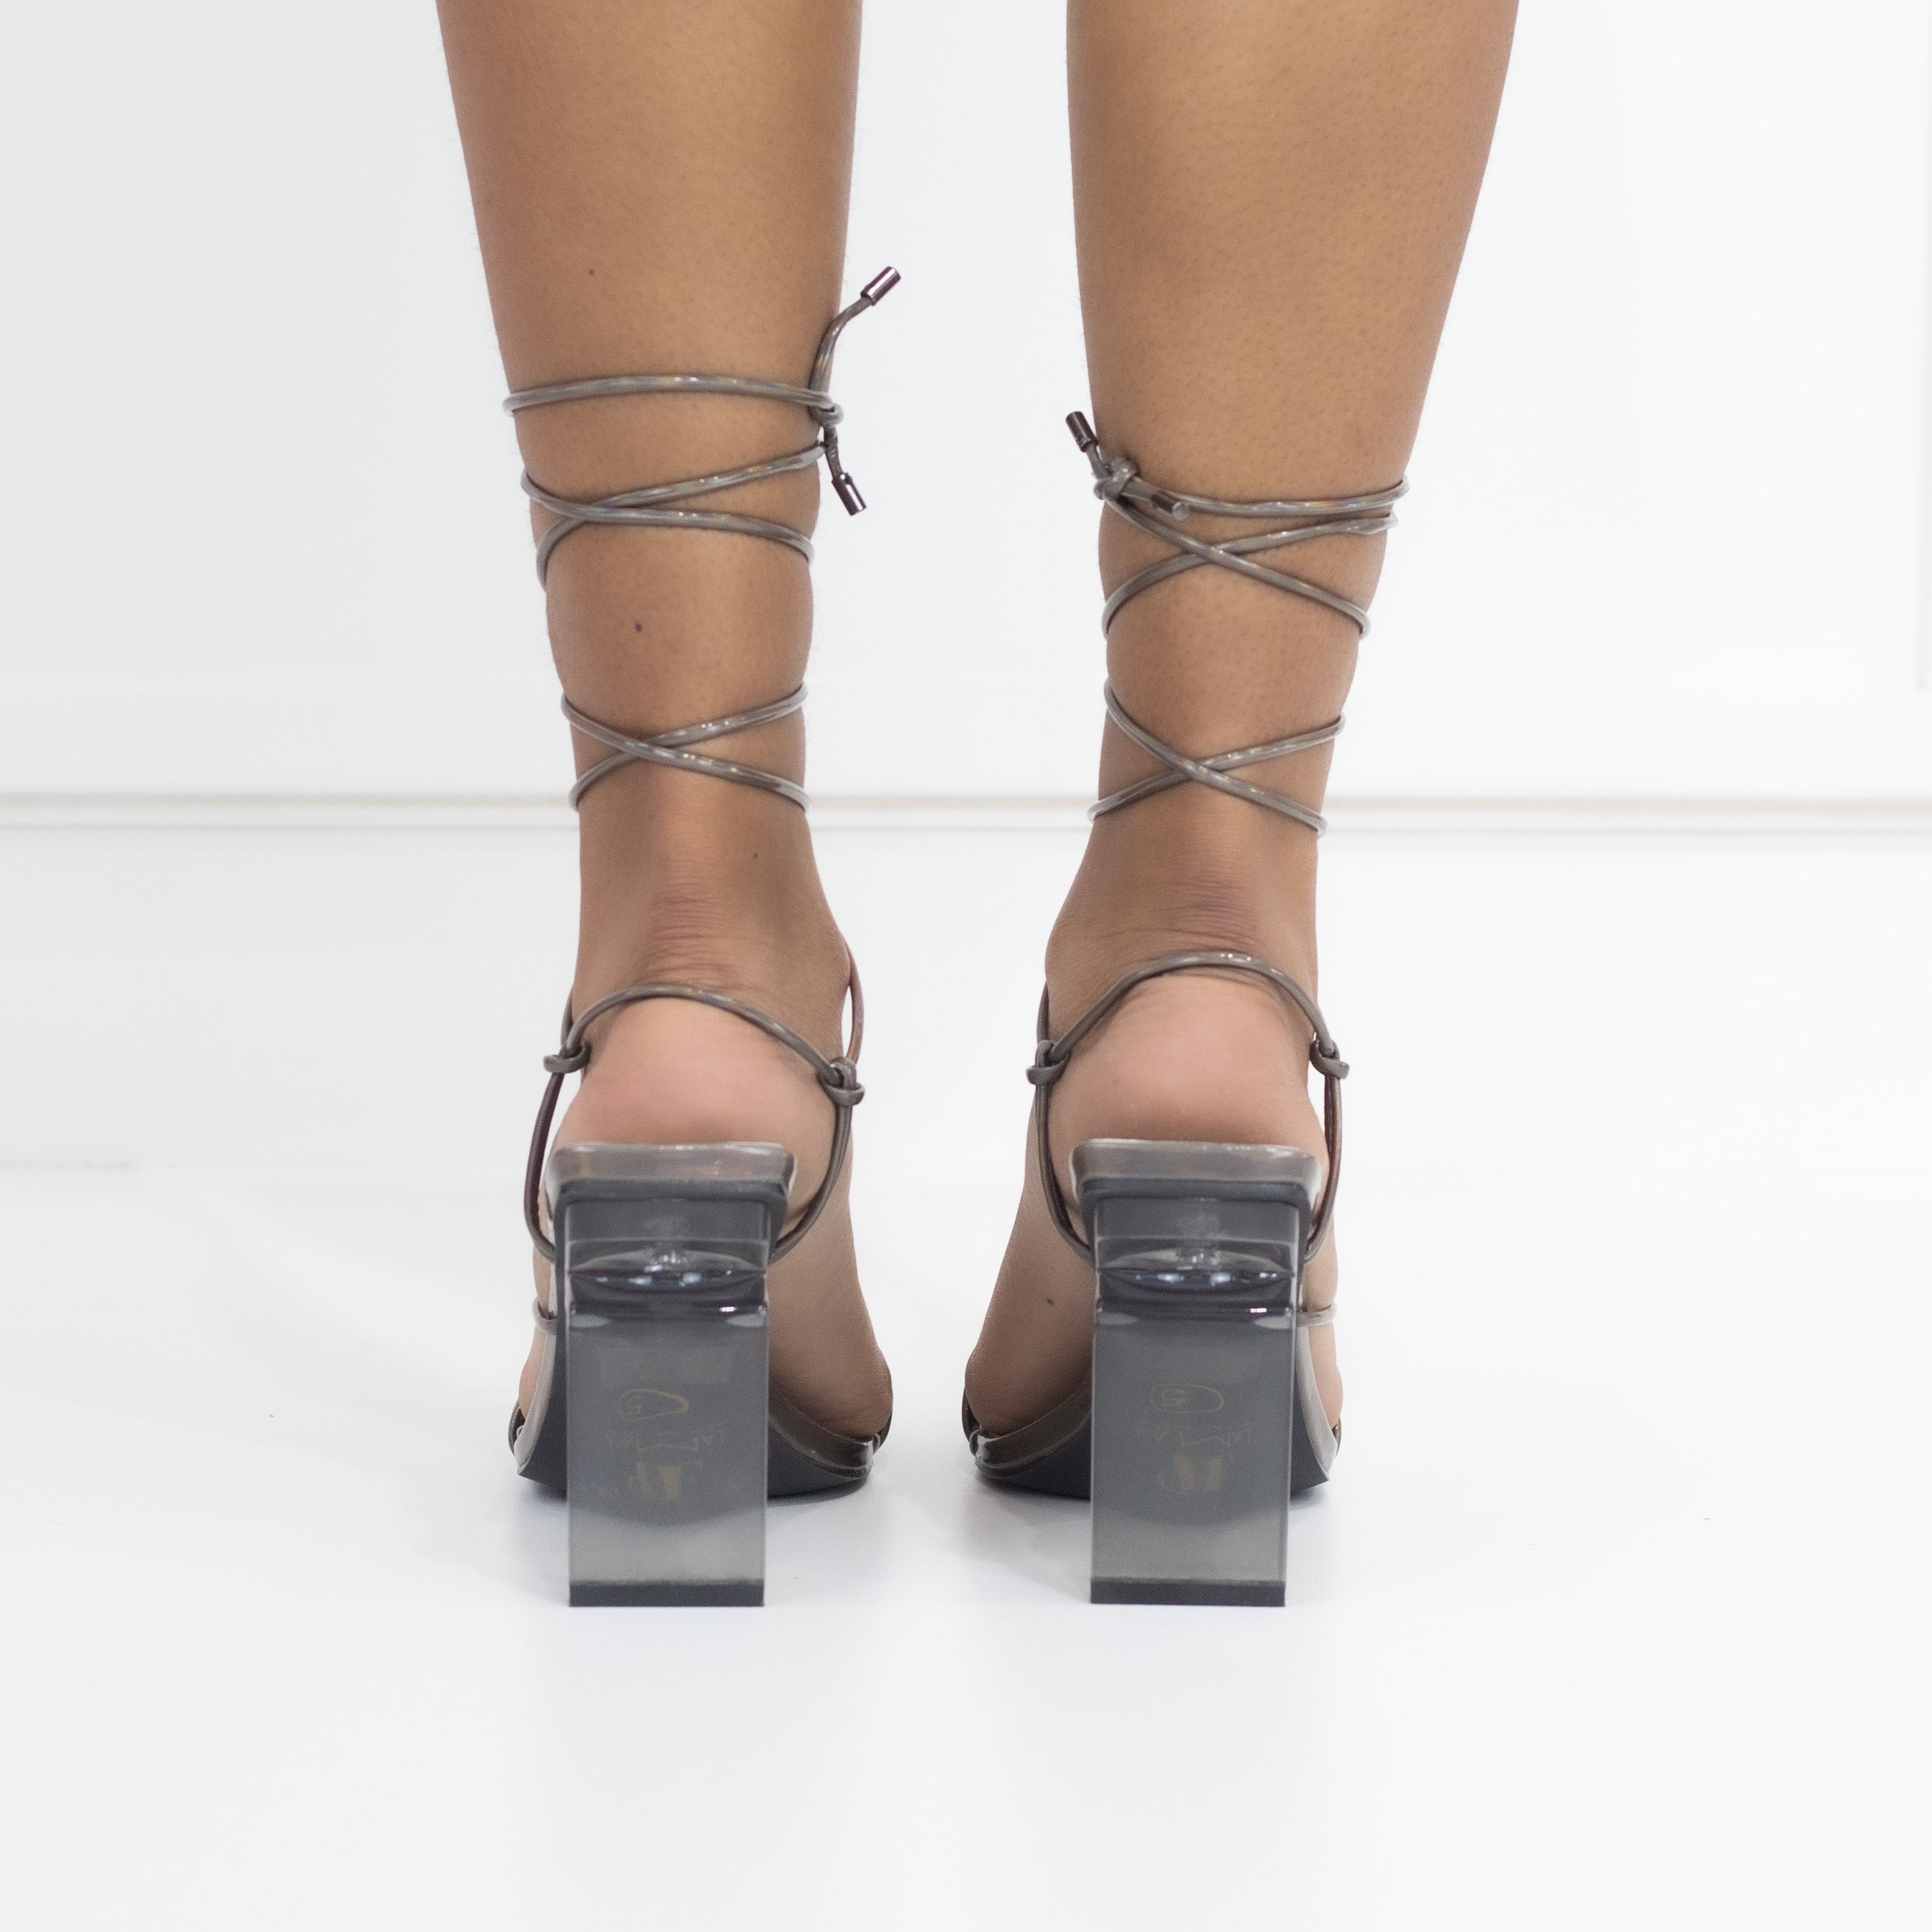 Pewter strappy sandals on special regt heel nadzia